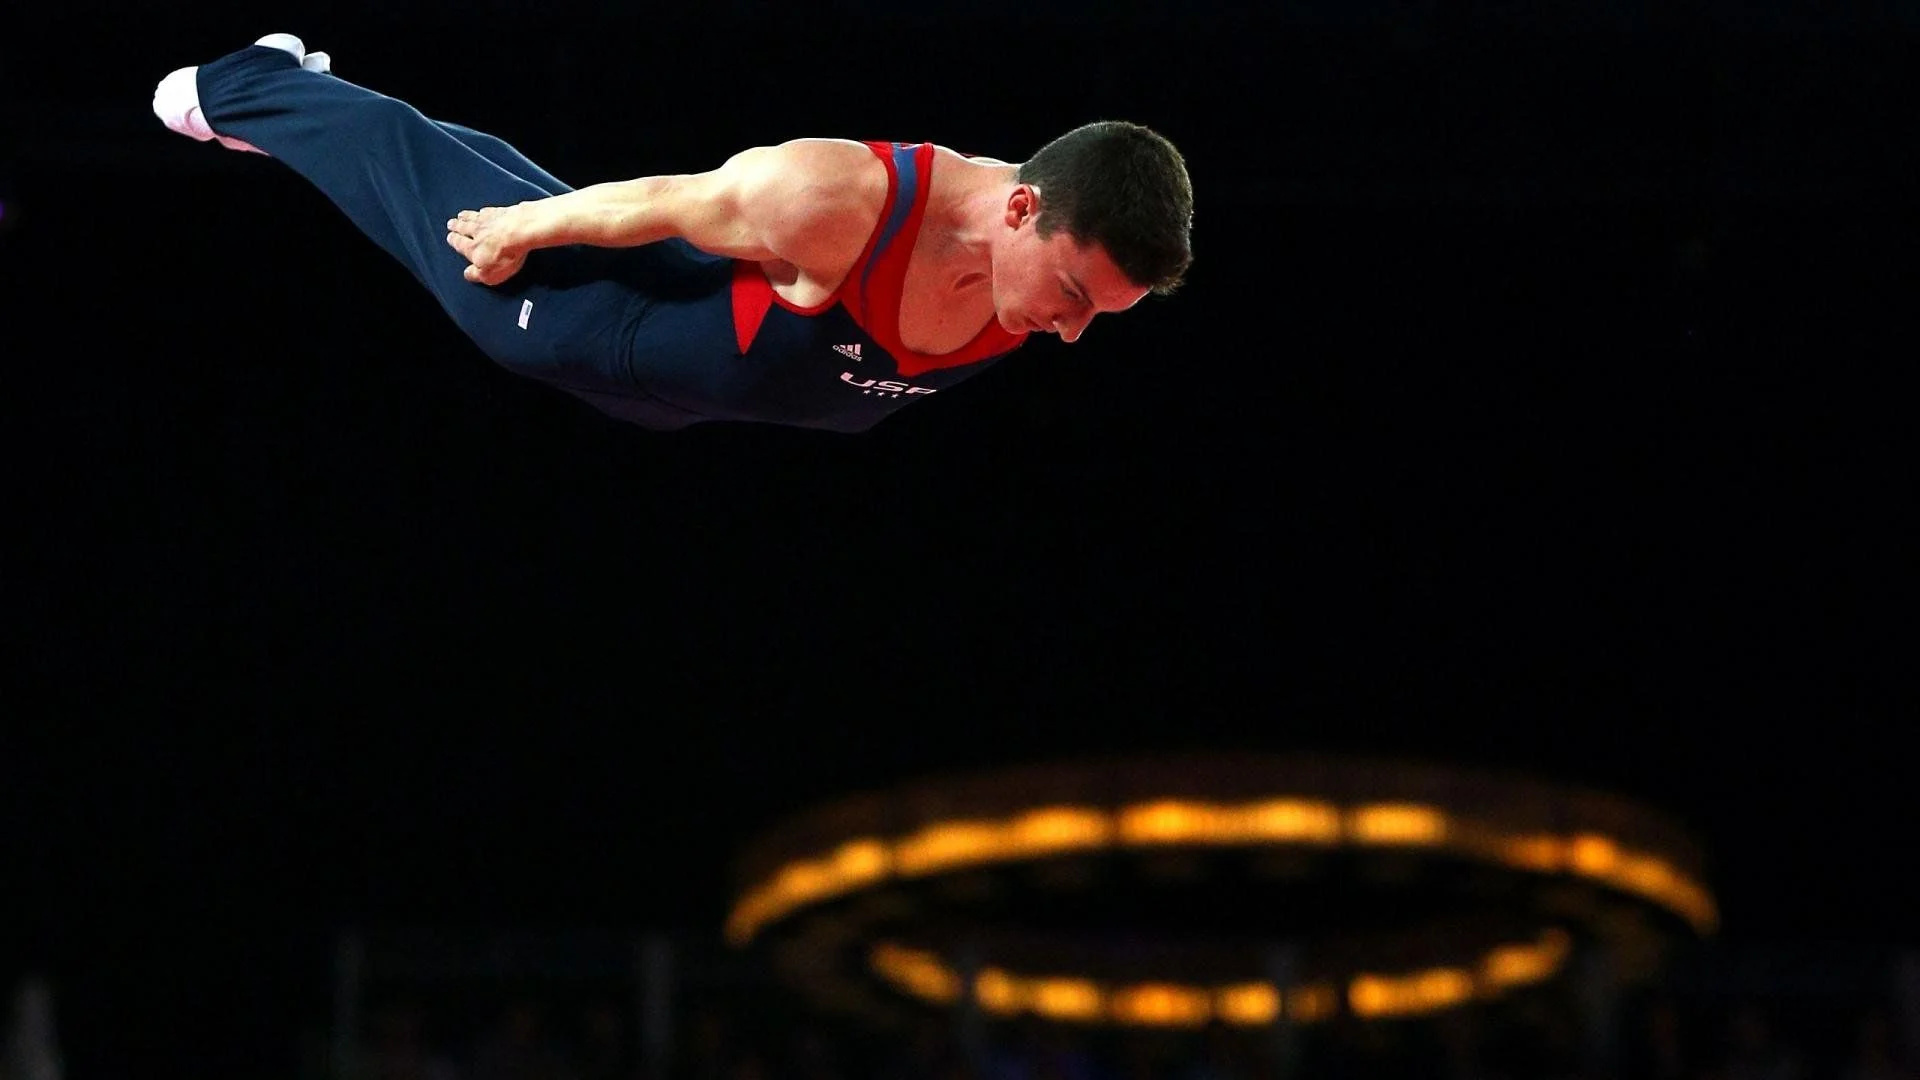 Trampoline gymnastics: Power tumbling, A gymnastics discipline in which participants perform a series of acrobatic skills down a long track. 1920x1080 Full HD Background.